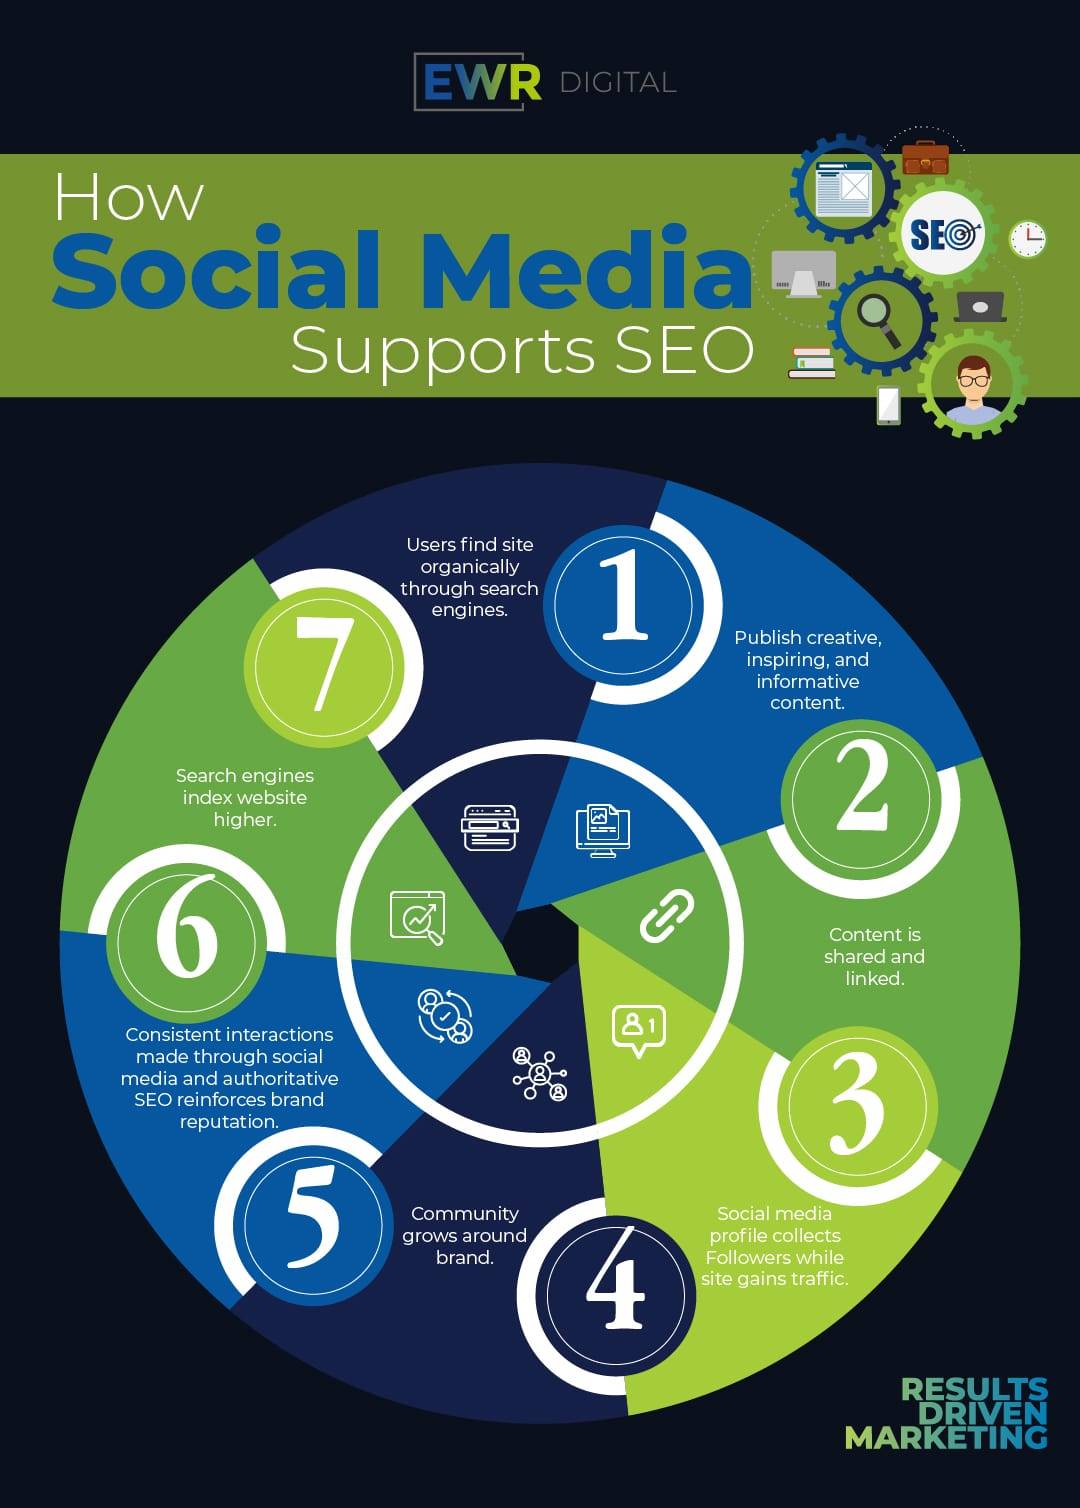 How Social Media Supports SEO: Content, Linked, Shared, Followers, Community, interactions, indexing